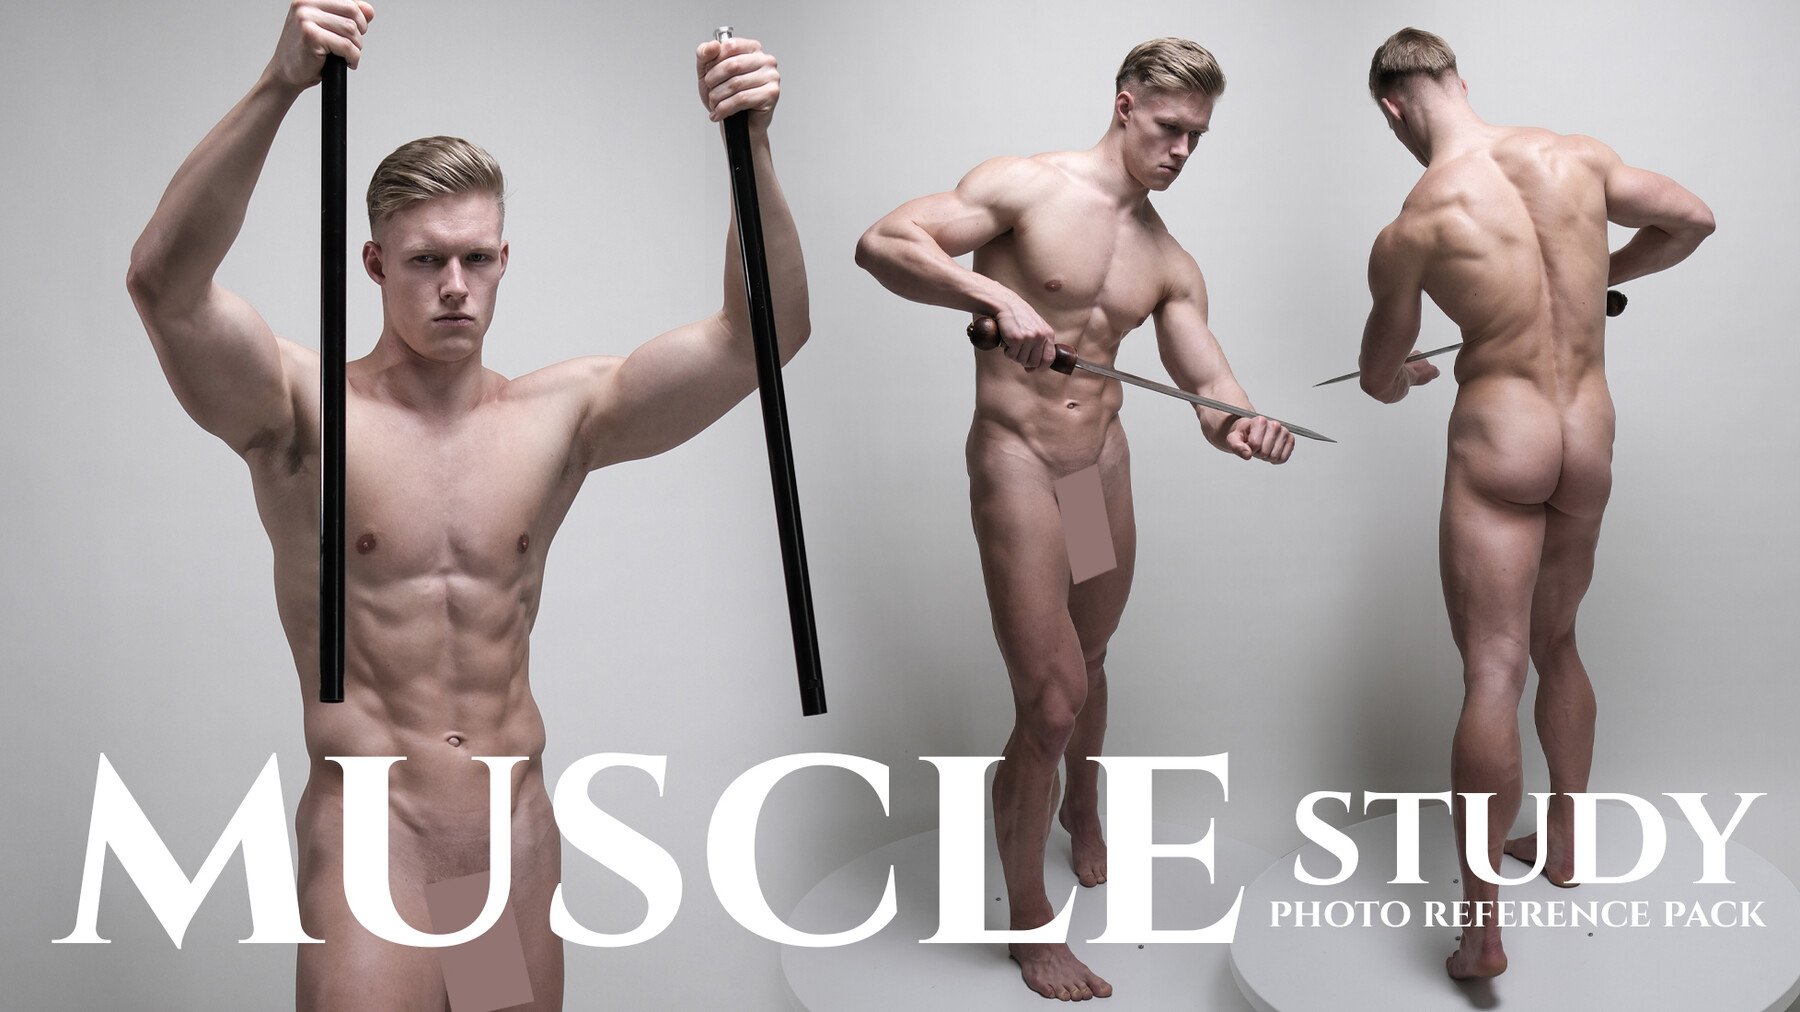 Muscle Study - Photo Reference Pack For Artists 646 JPEGs